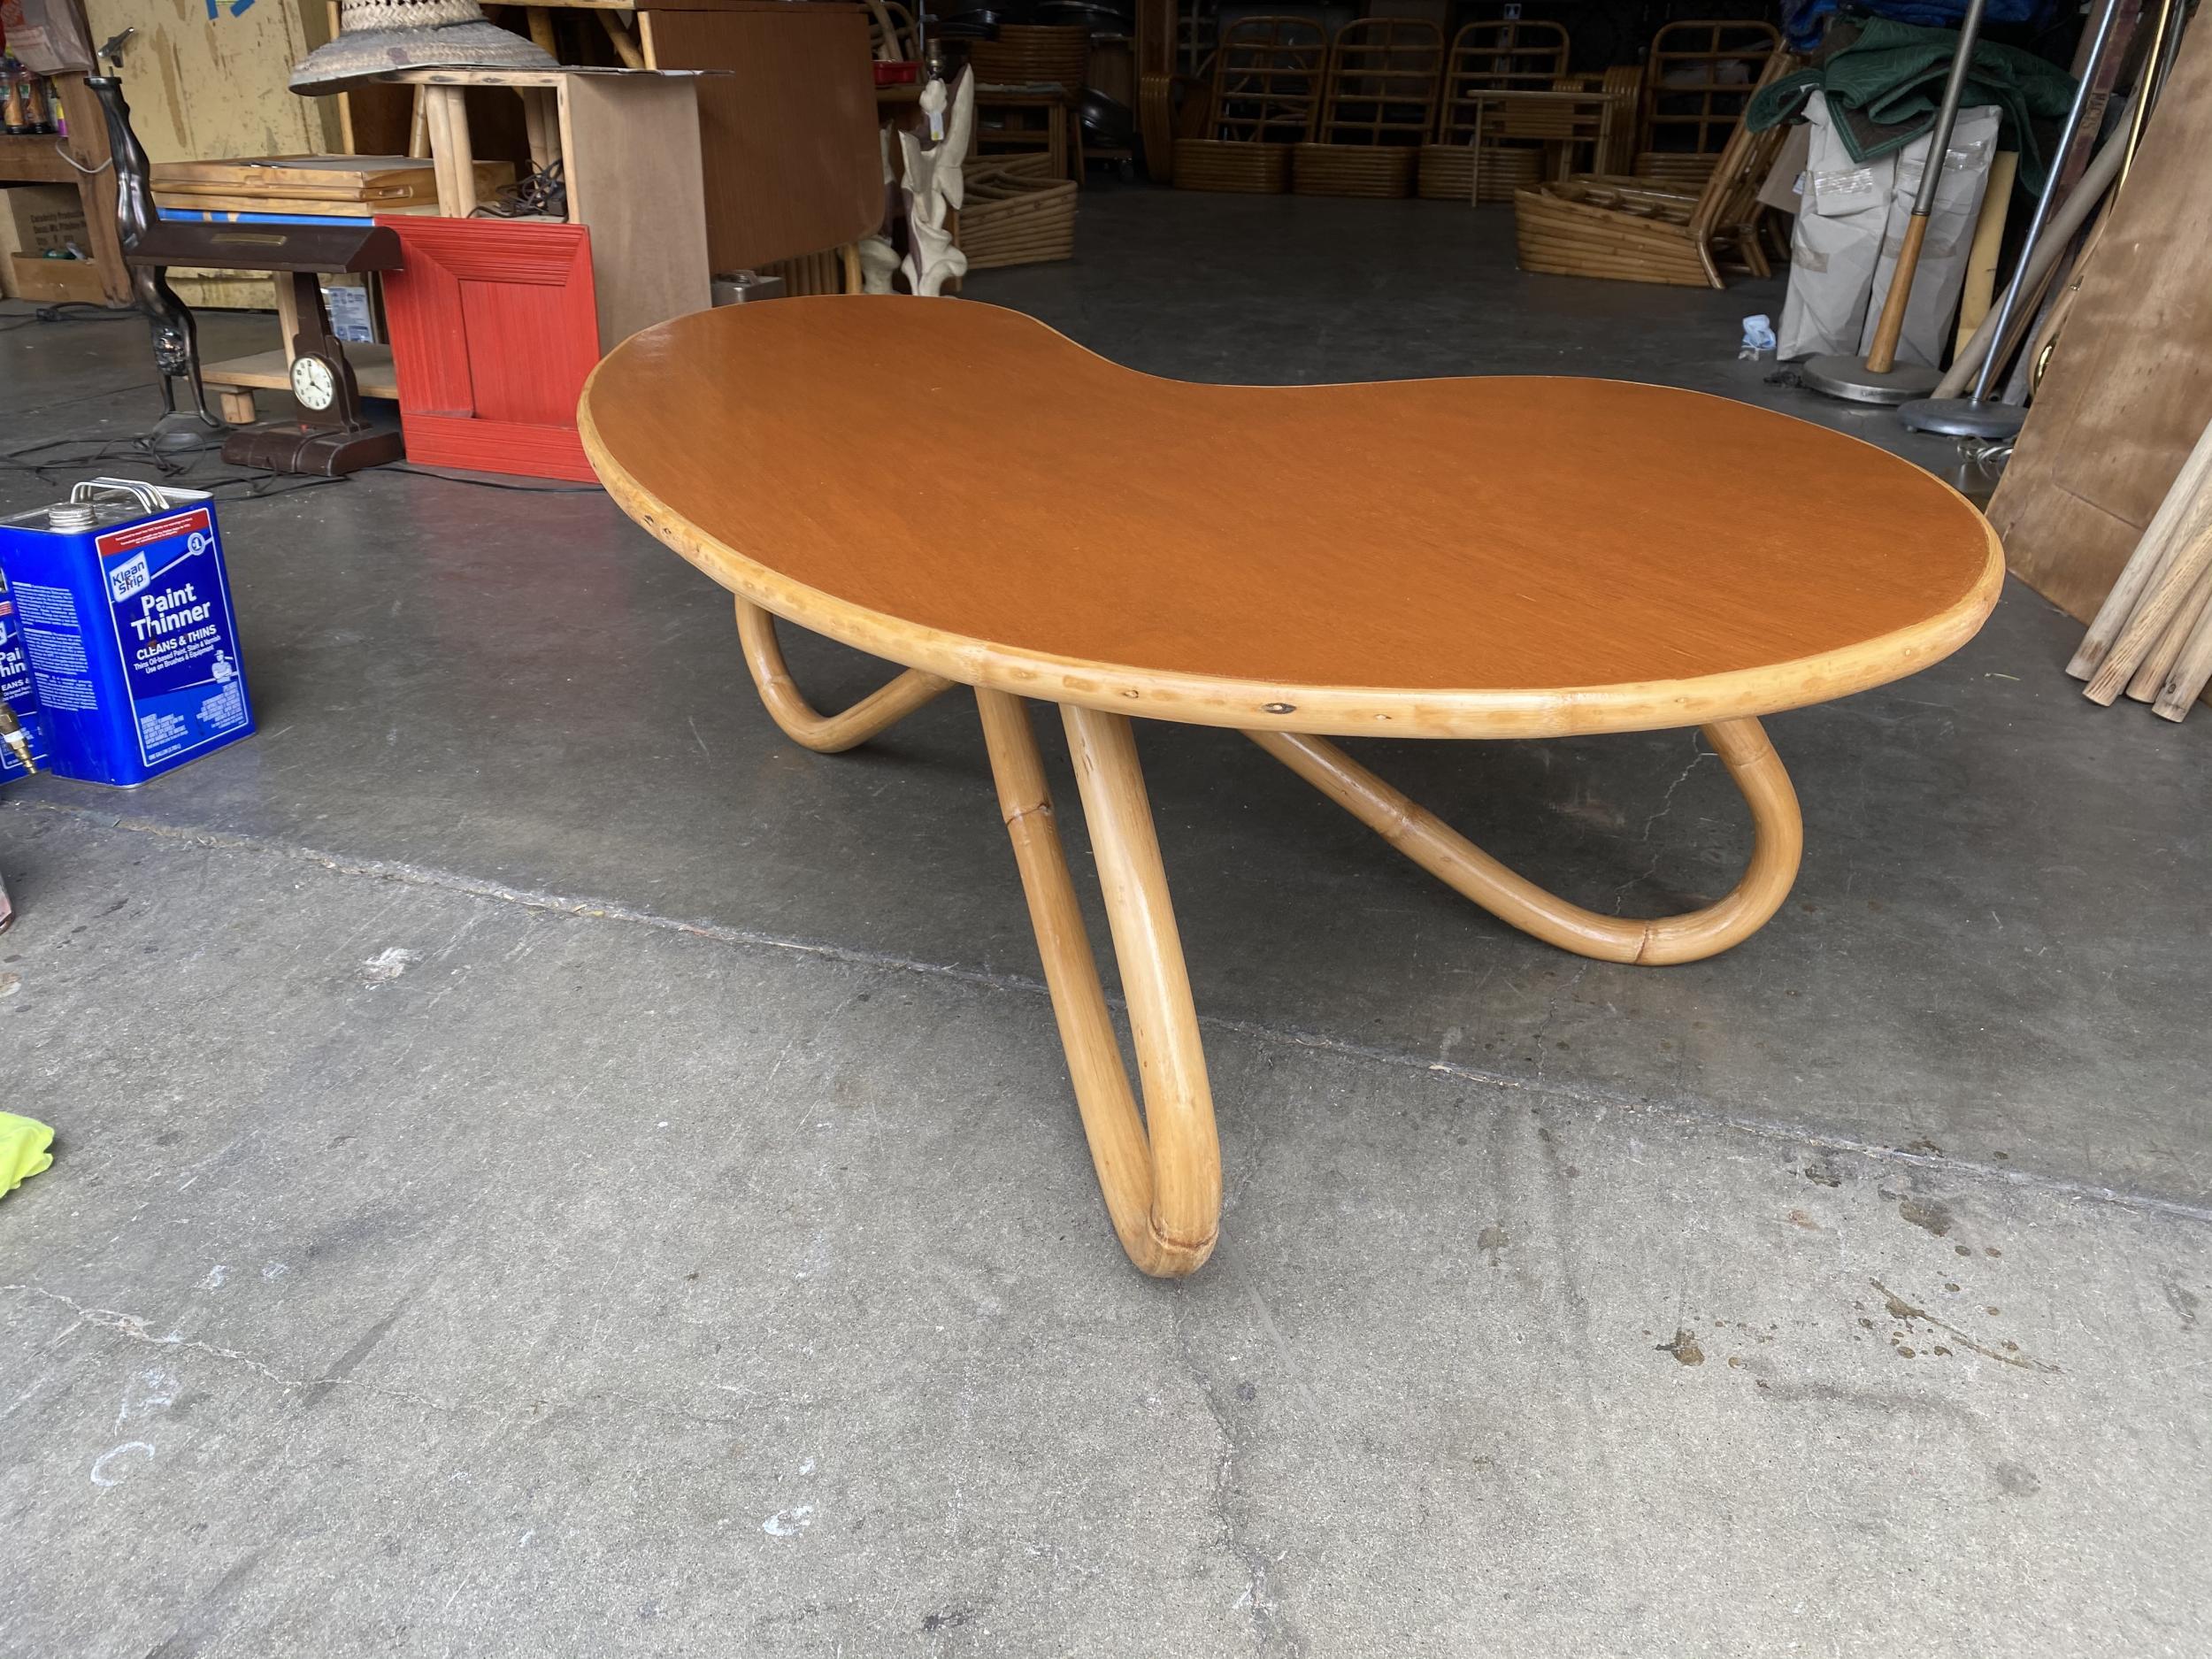 Biomorphic coffee table with loop rattan legs and a mahogany wood top with a rattan trim along the borders.

Restored to new for you.

All rattan, bamboo and wicker furniture has been painstakingly refurbished to the highest standards with the